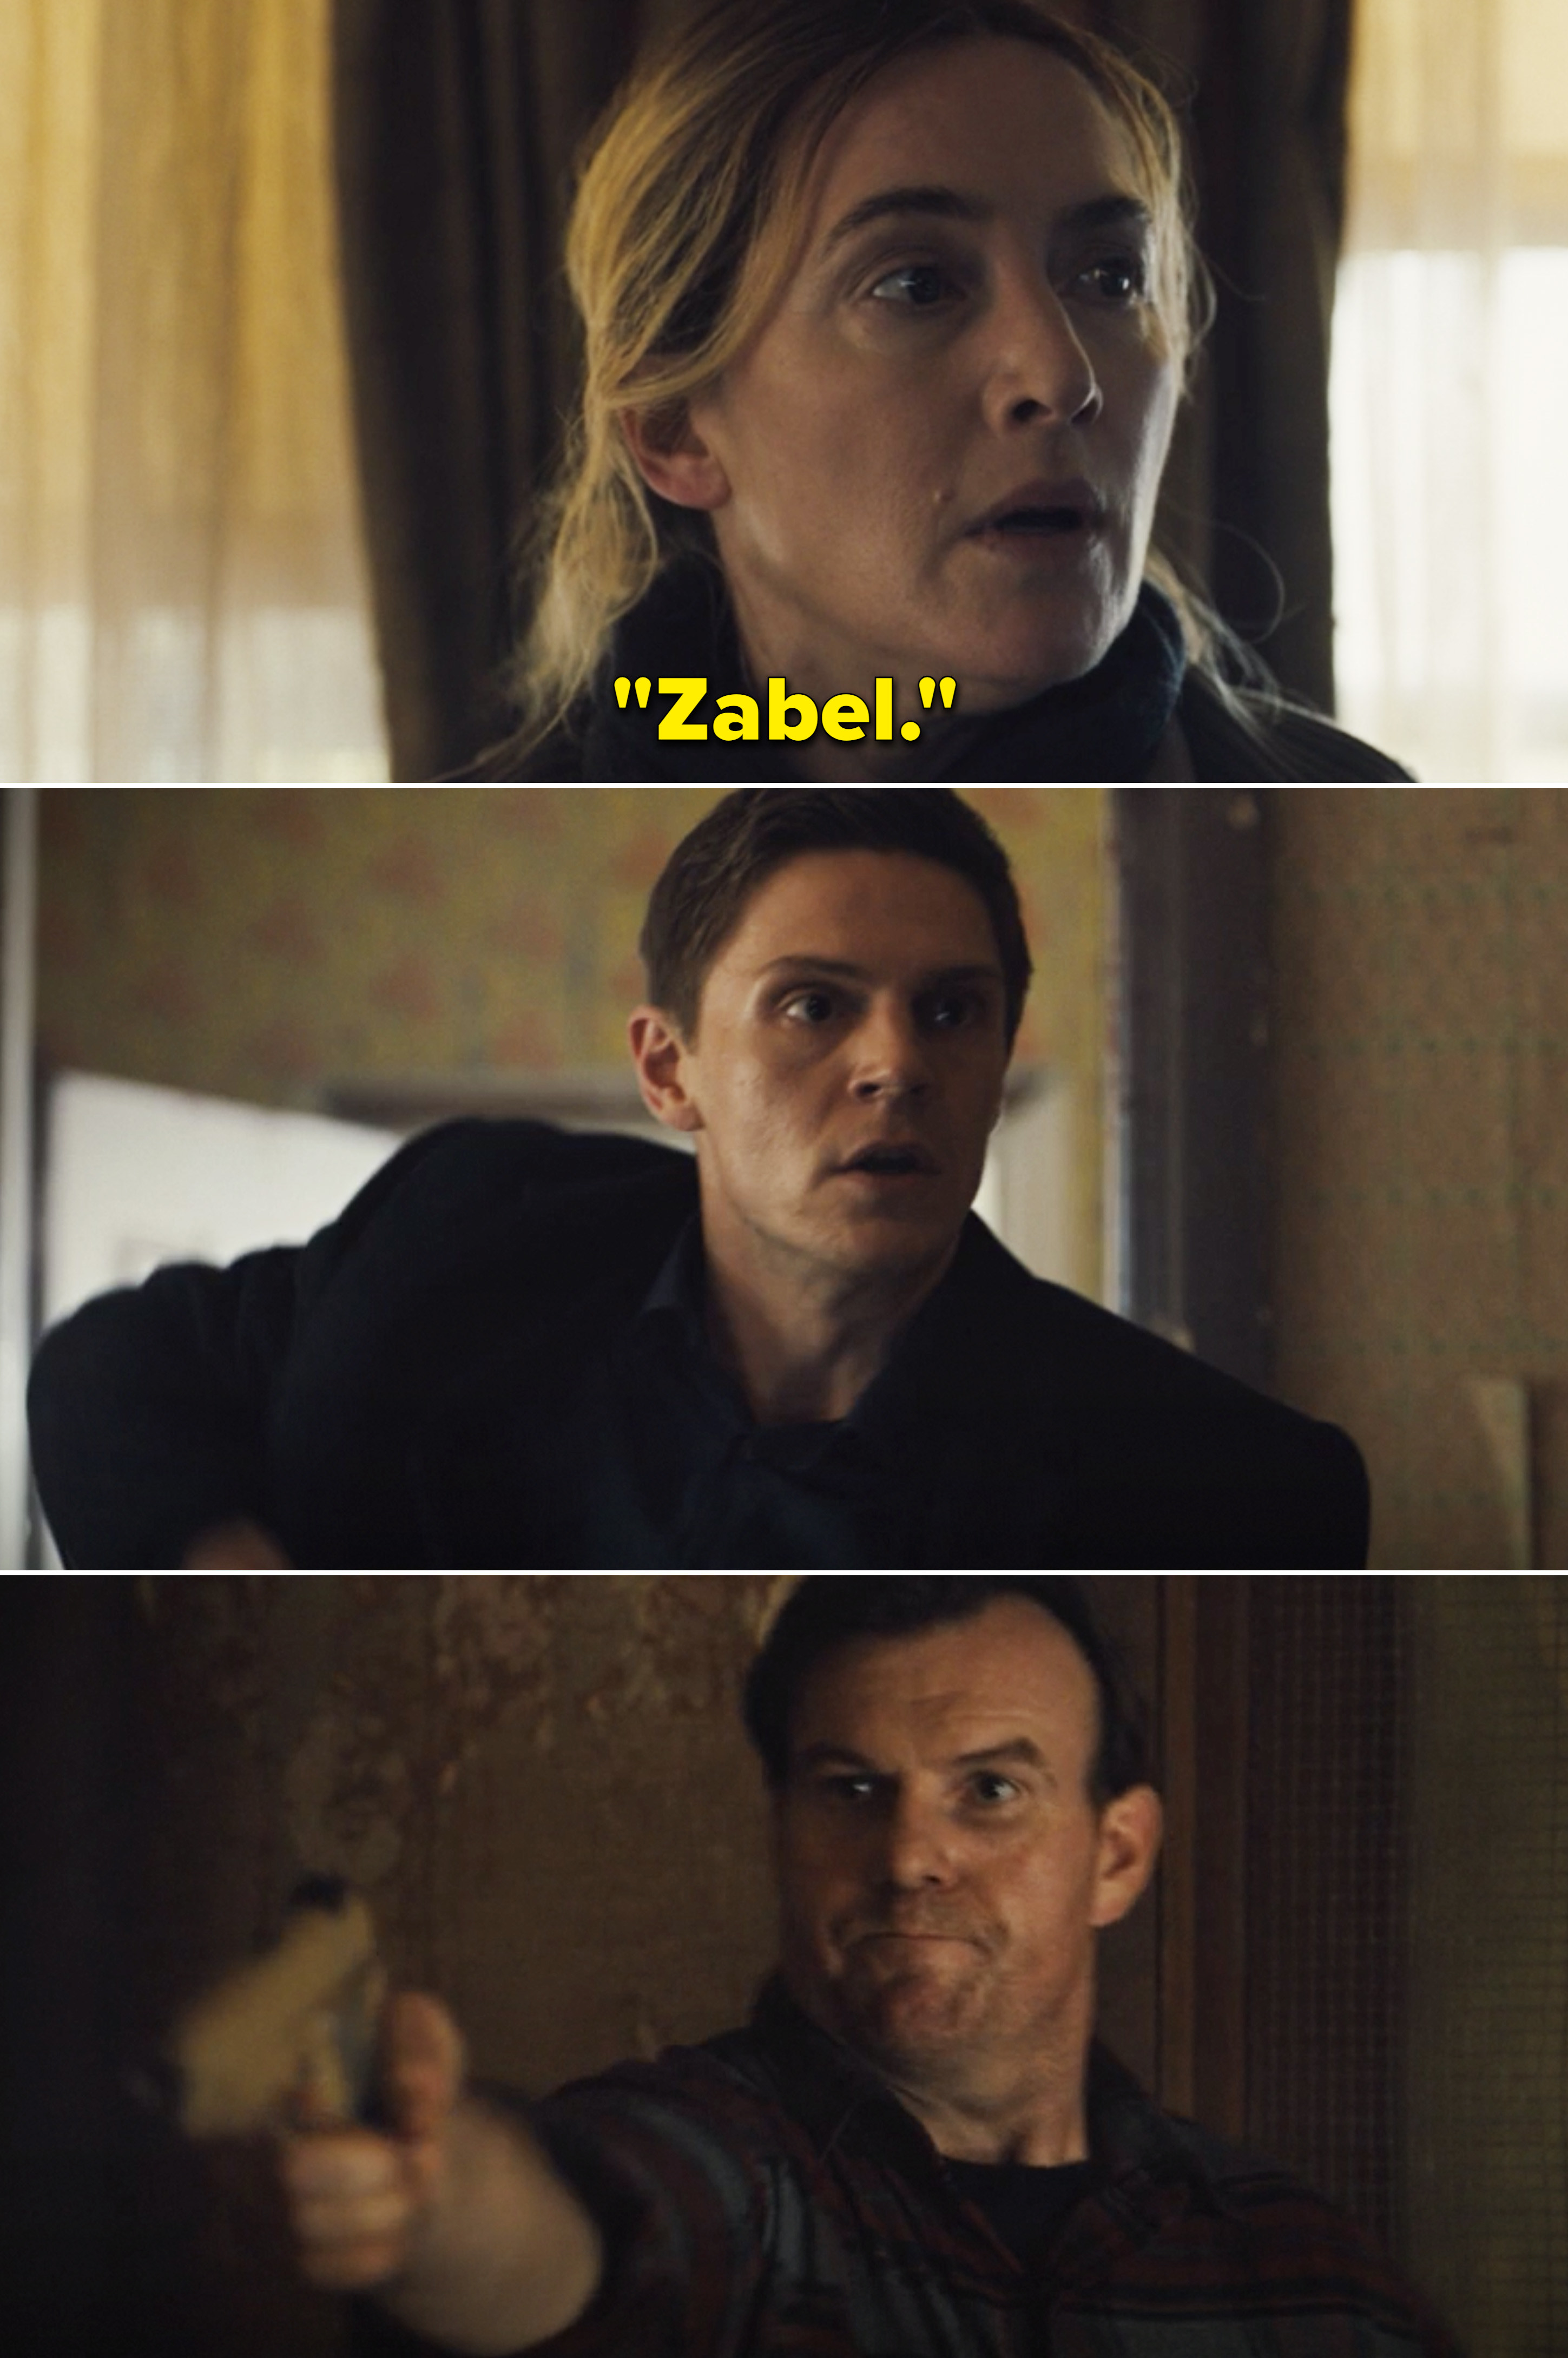 Kate calls out &quot;Zabel,&quot; who reaches for his gun, but Wayne pulls out his gun